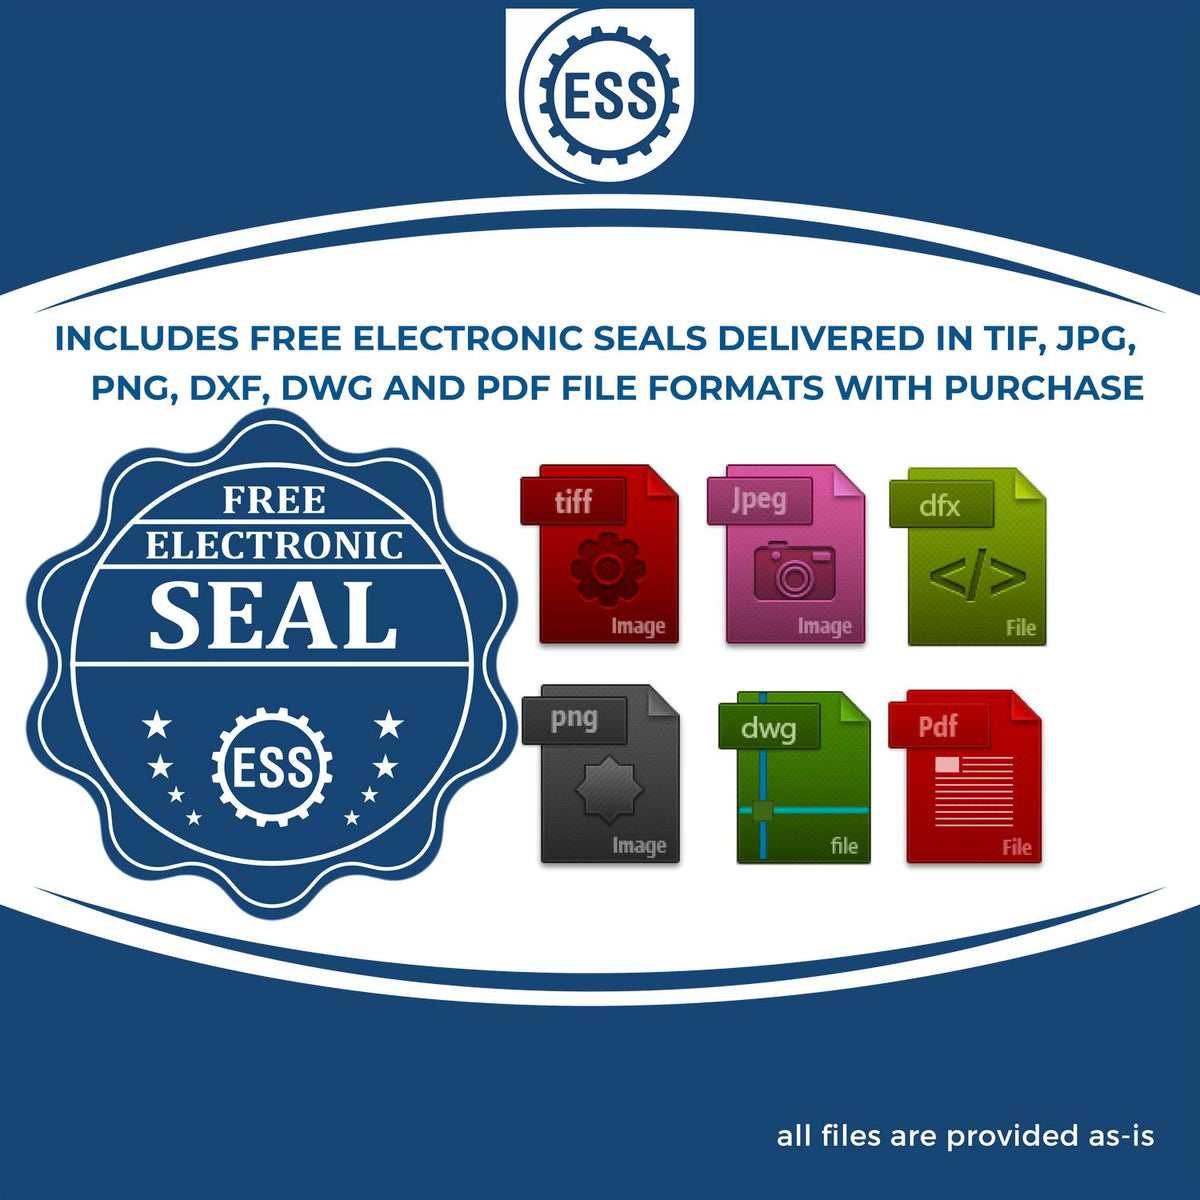 An infographic for the free electronic seal for the Slim Pre-Inked Delaware Professional Geologist Seal Stamp illustrating the different file type icons such as DXF, DWG, TIF, JPG and PNG.